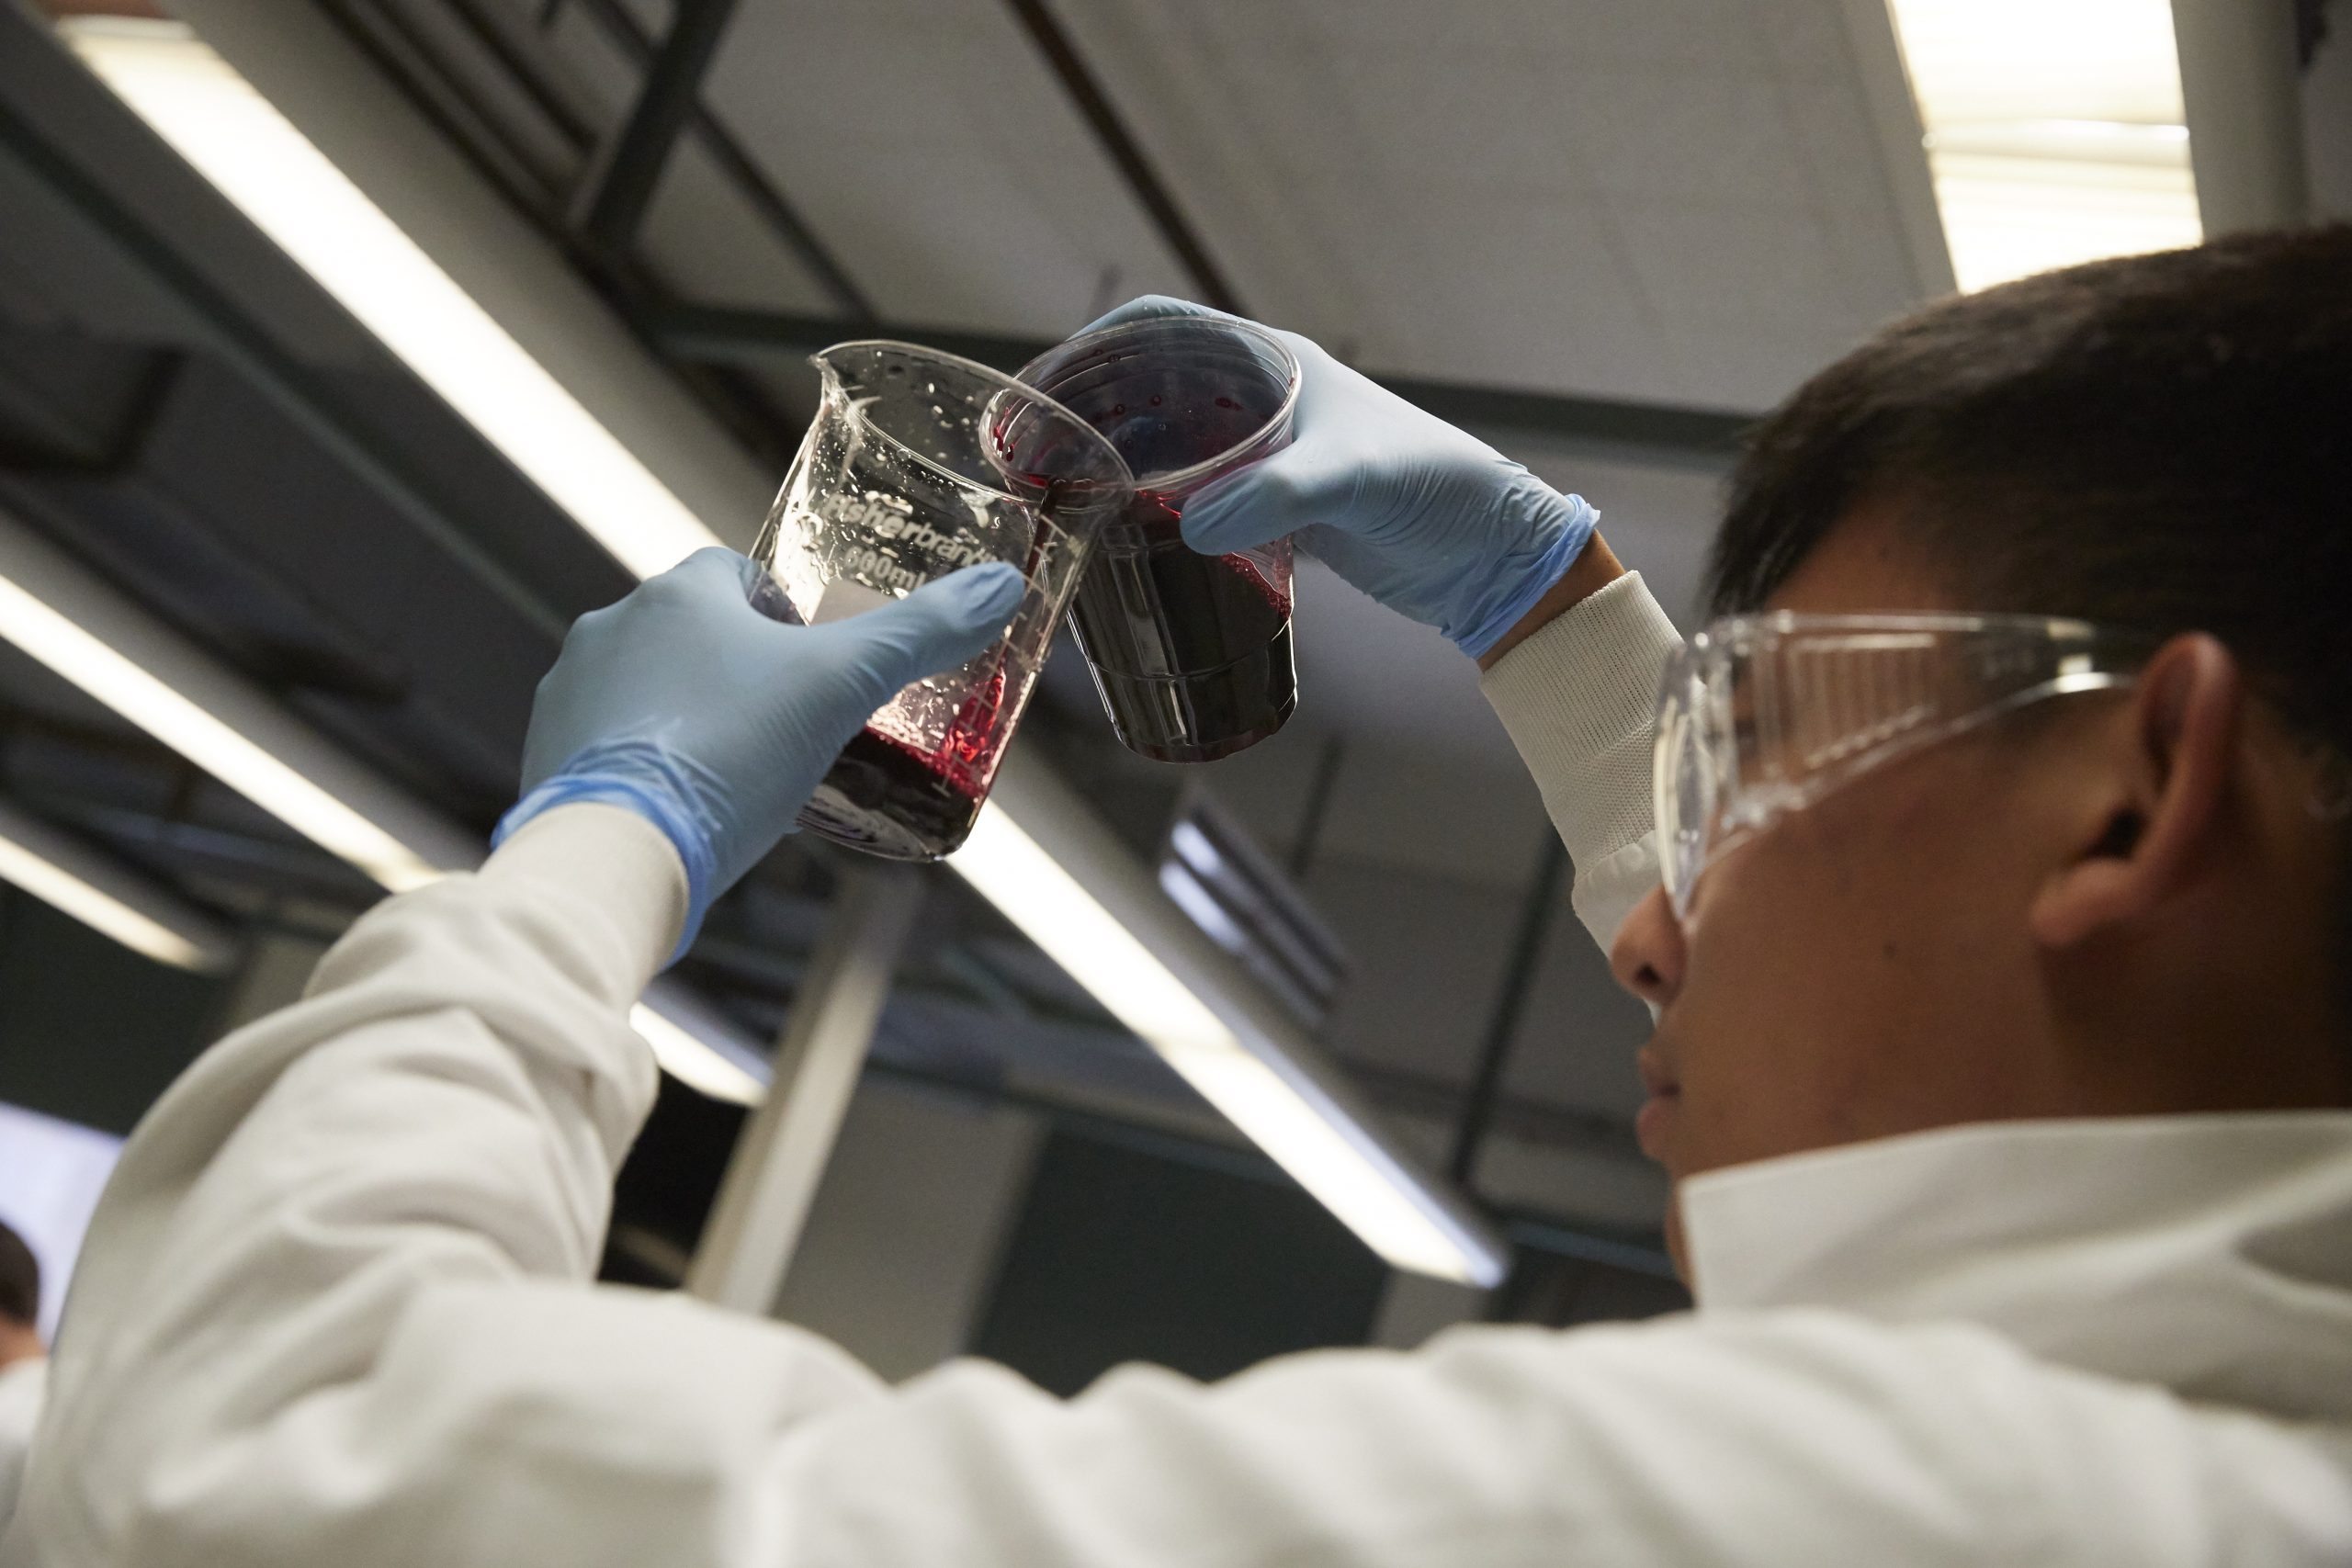 A student in a white lab coat, protective glasses and gloves pours a red liquid from a cup into a beaker.